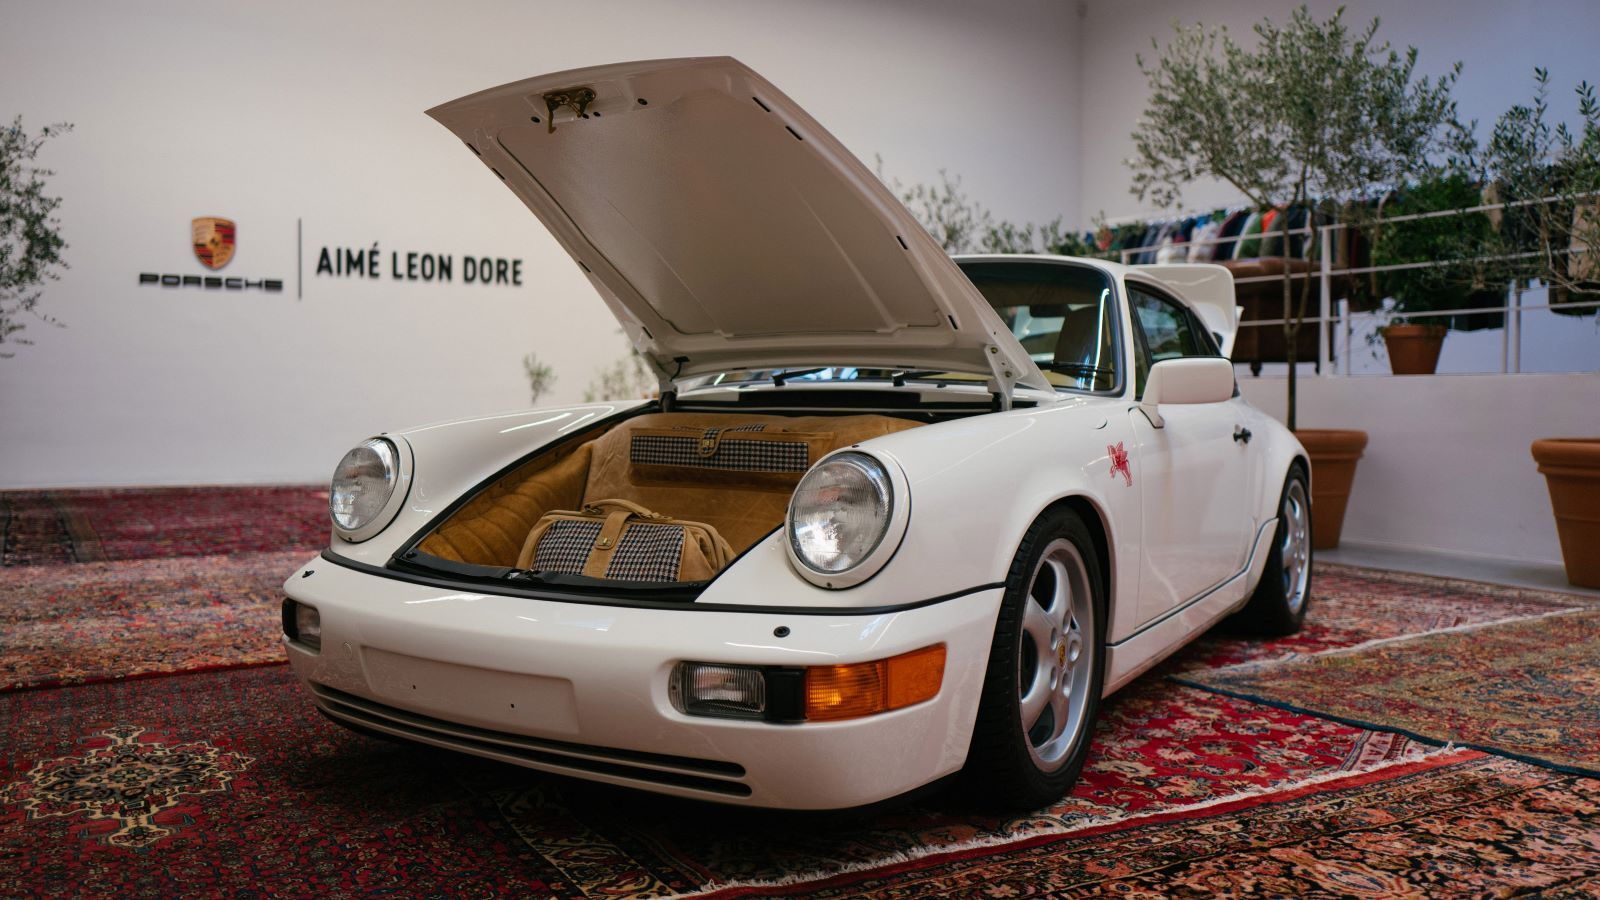 Flashback: When A Fashion Designer Gets a Hold of a 911